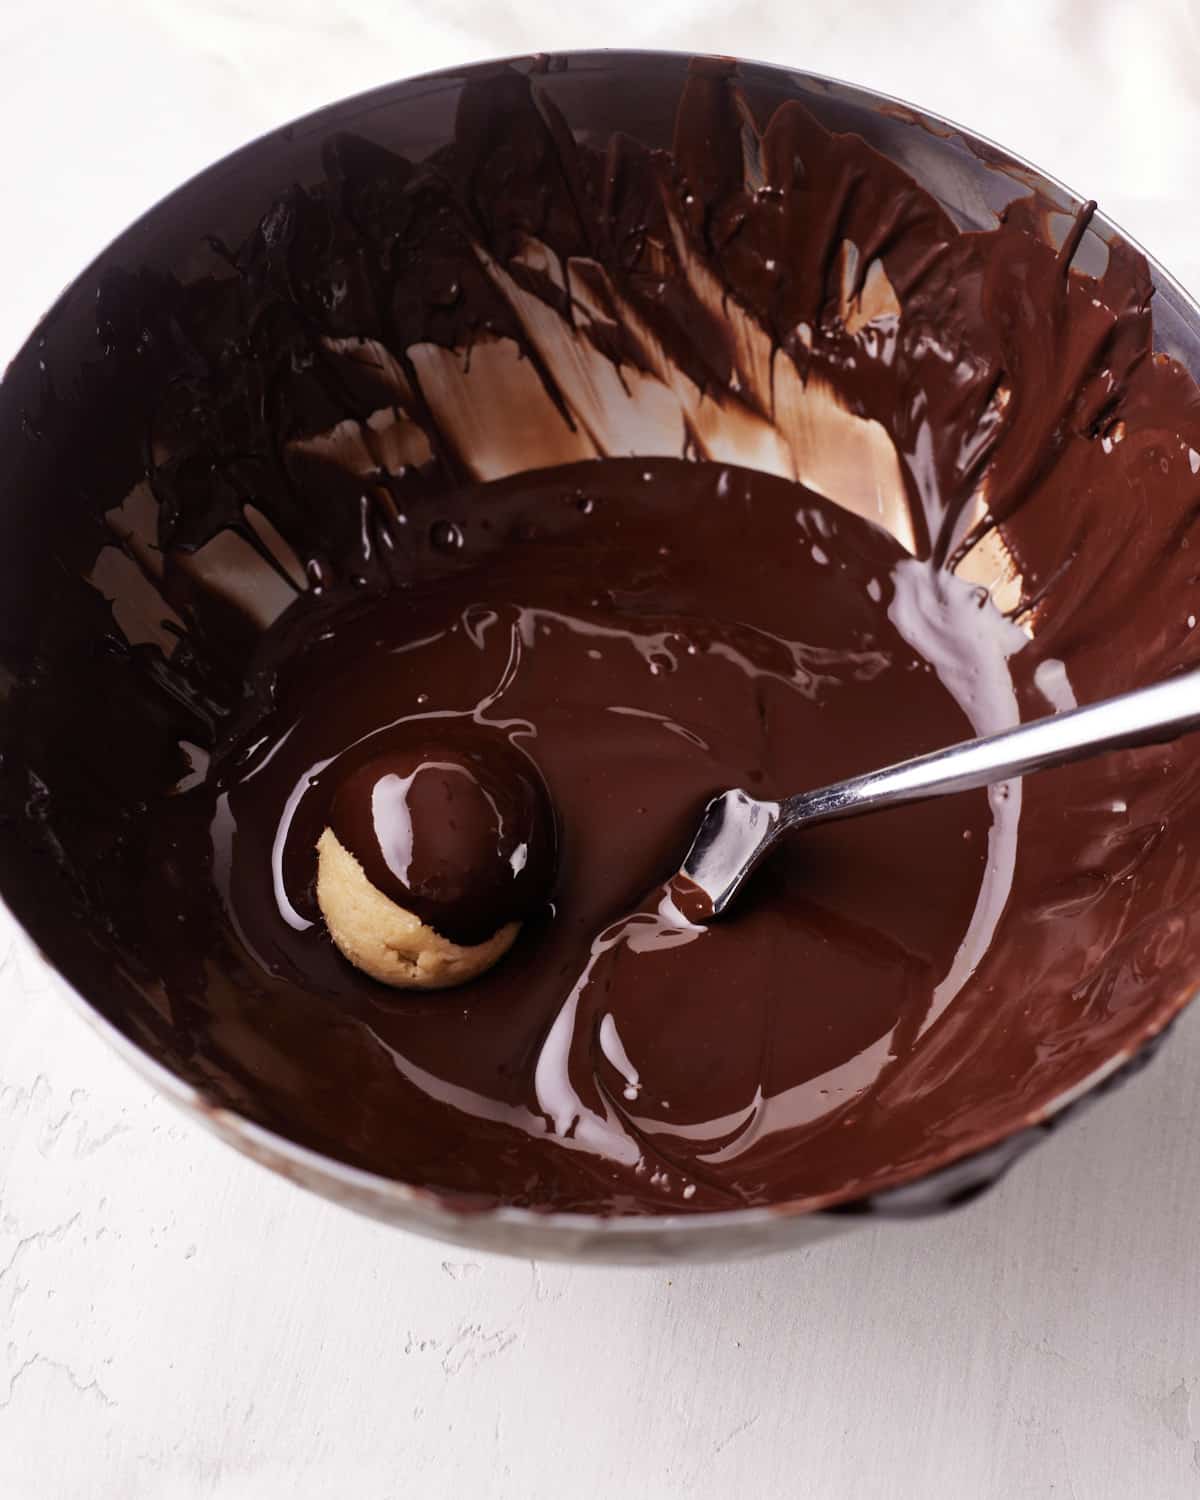 dipping cookie dough bites in melted chocolate